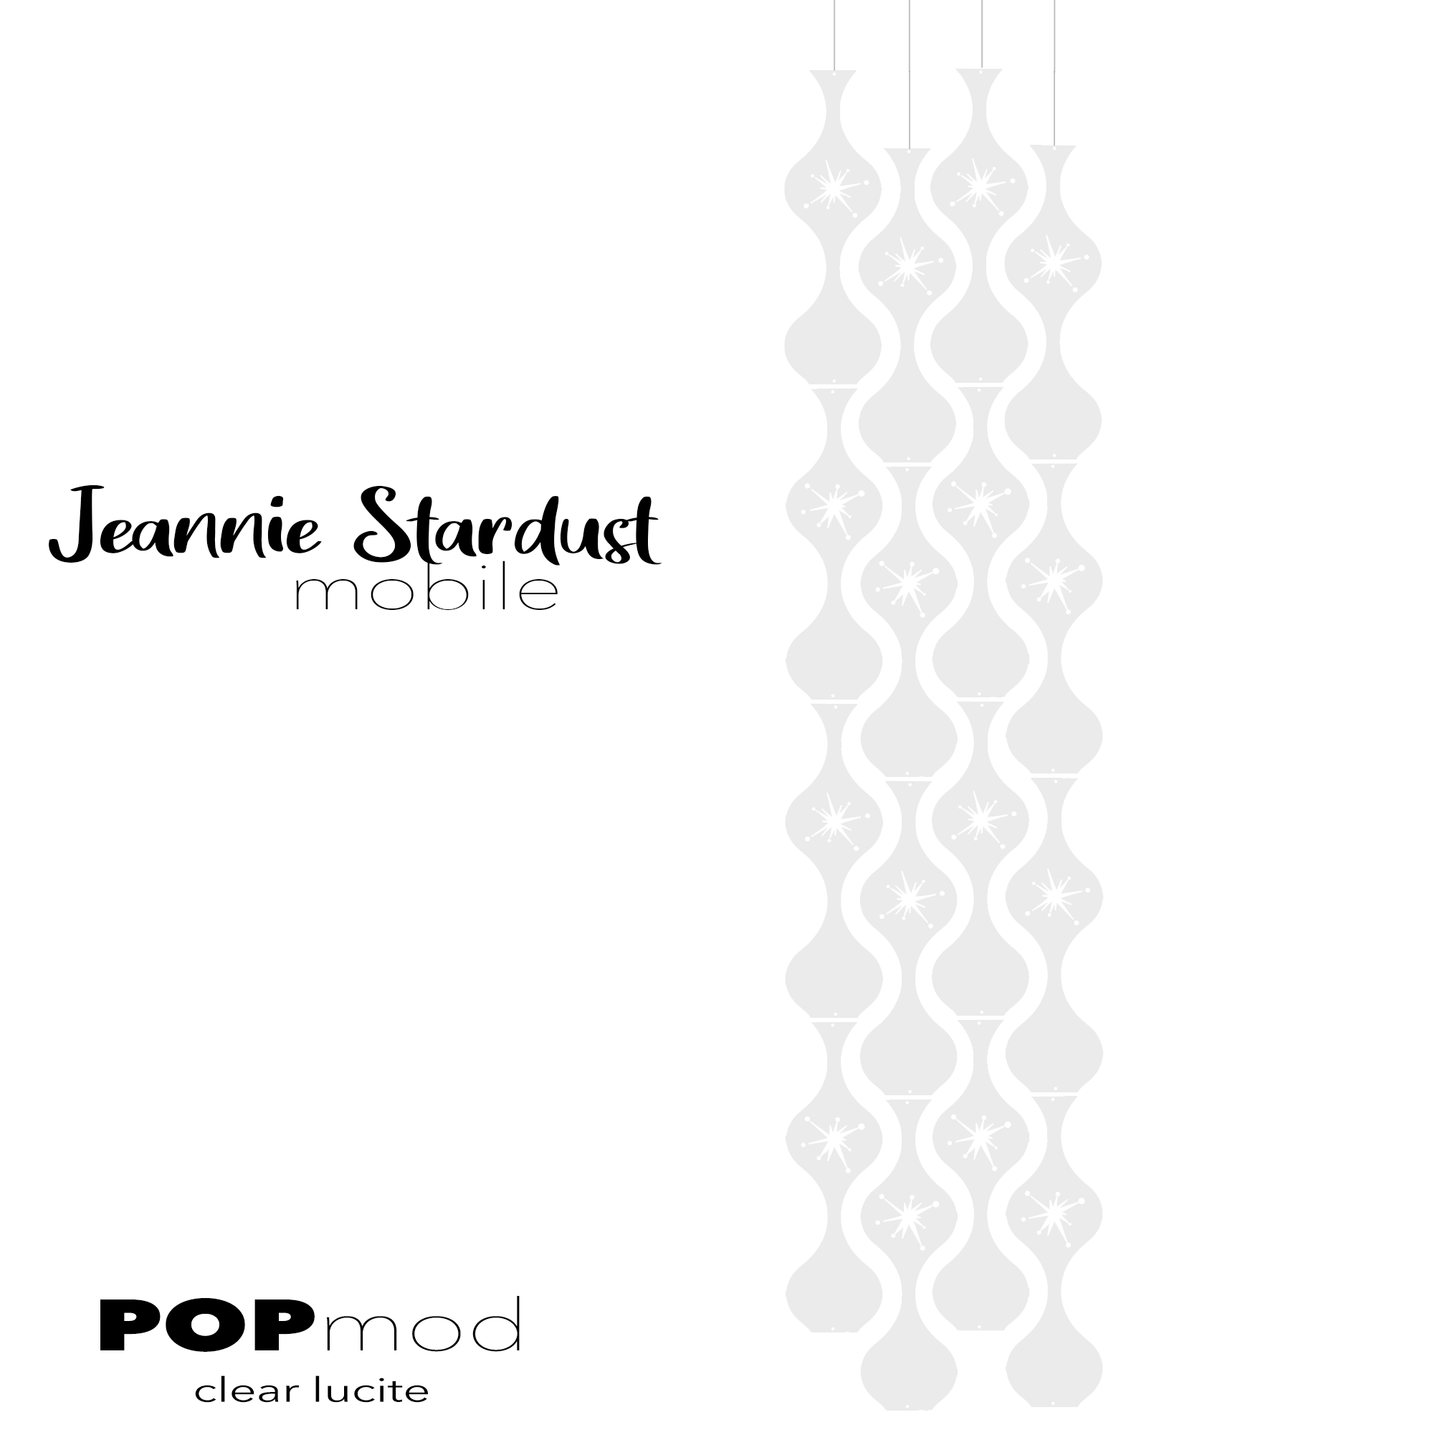  Jeannie Stardust POPmod - Clear plexiglass acrylic hanging art mobiles in mid century modern style for home decor by AtomicMobiles.com